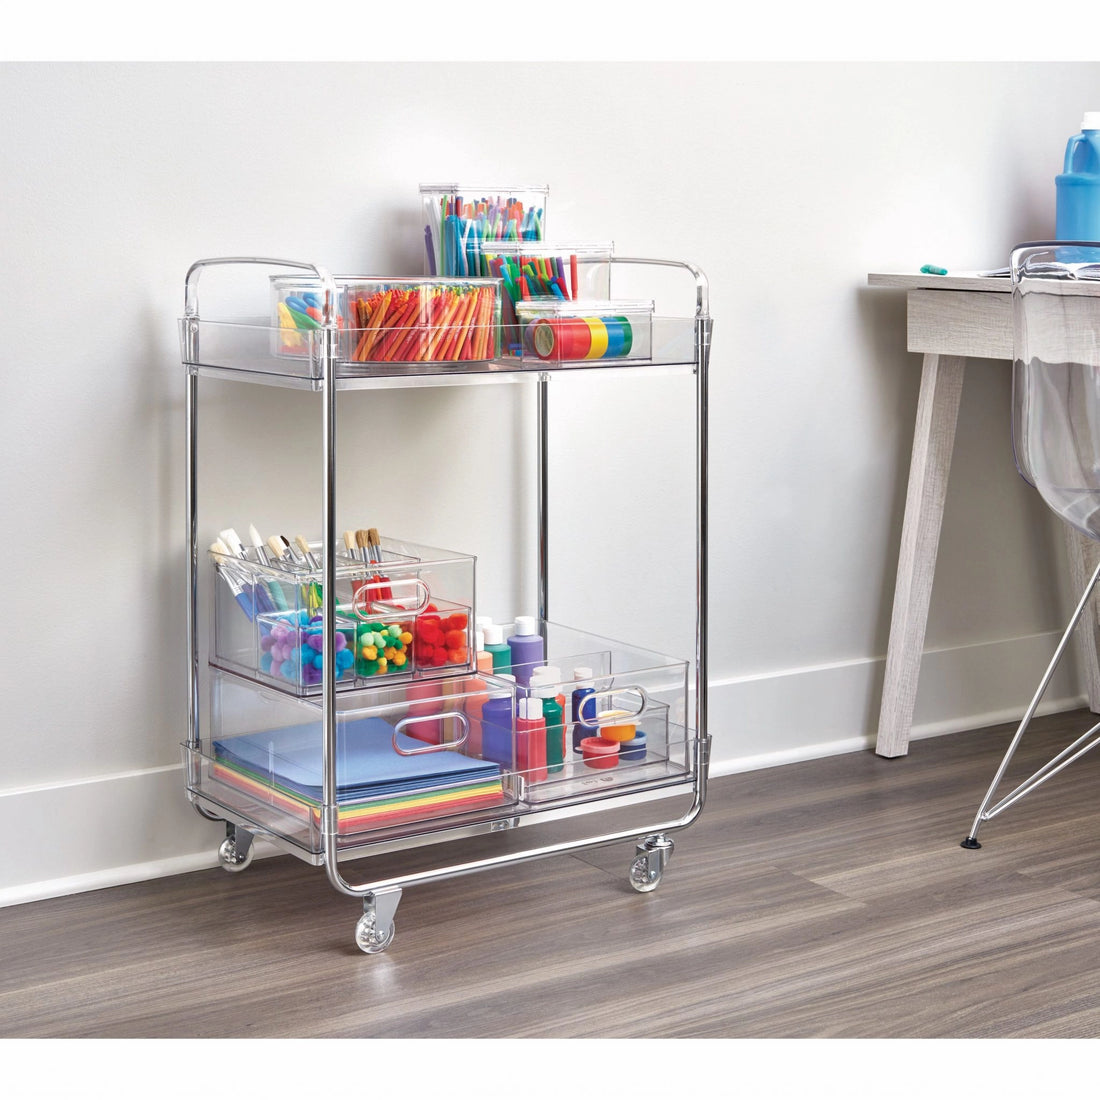 5 Ways to Use Our Clear Rolling Cart in Your Home